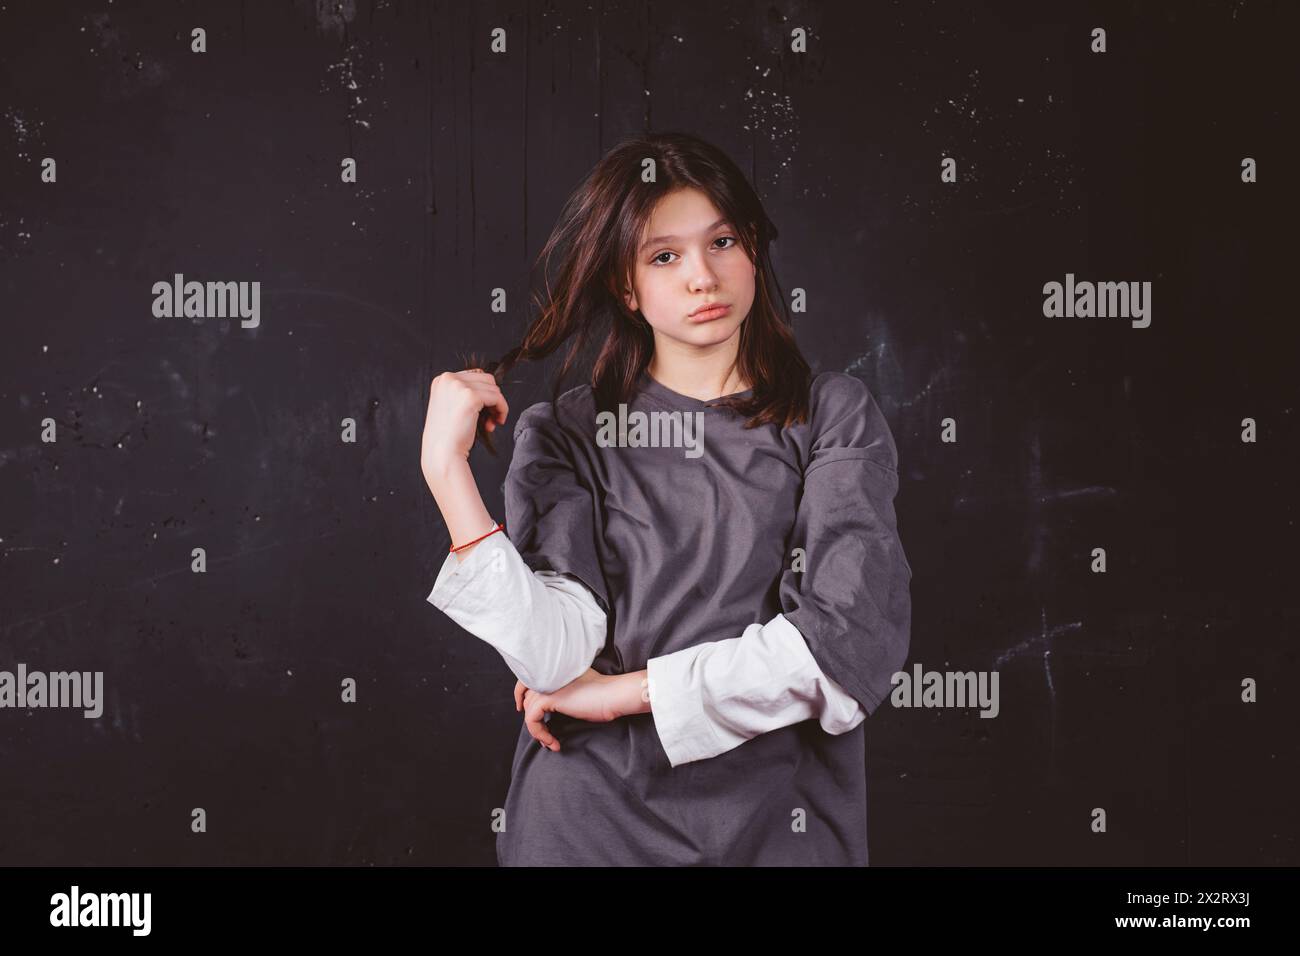 Sad girl holding hair standing in front of black background Stock Photo